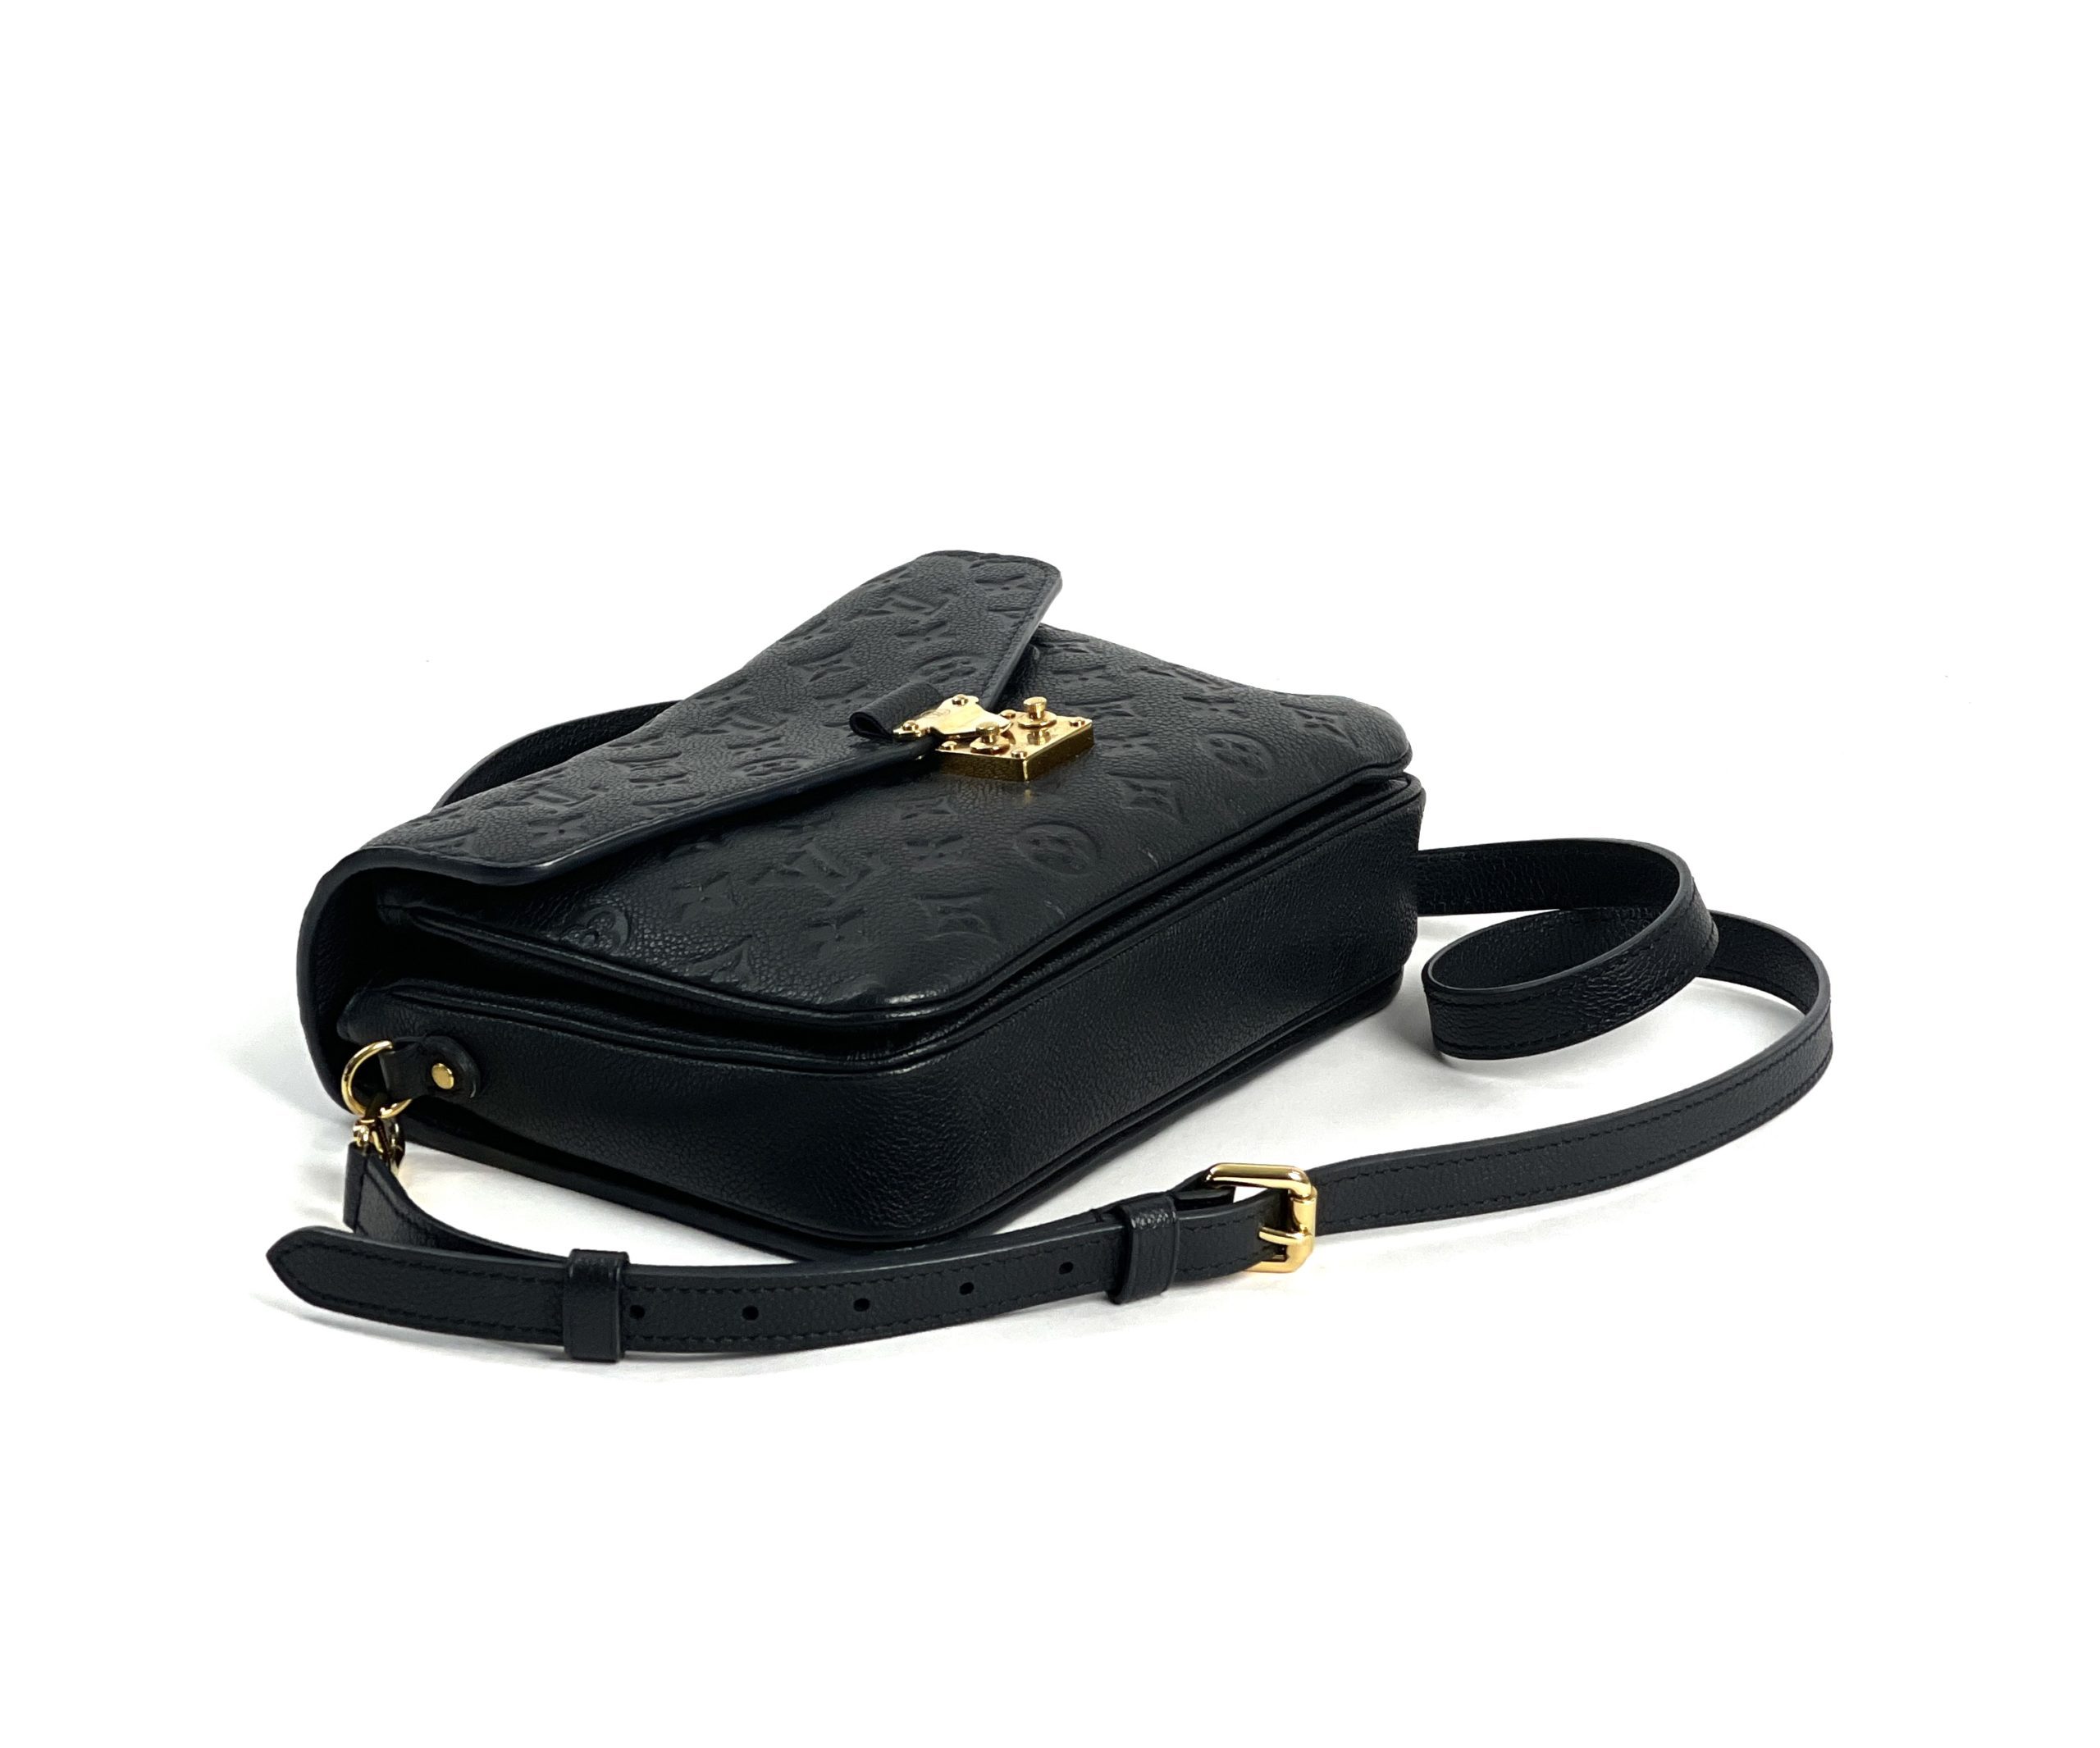 Been seeing the Petite Malle Souple in black and monogram but I have the Pochette  Métis in black empreinte so I wanted a creme/white bag. I went to the store  to see